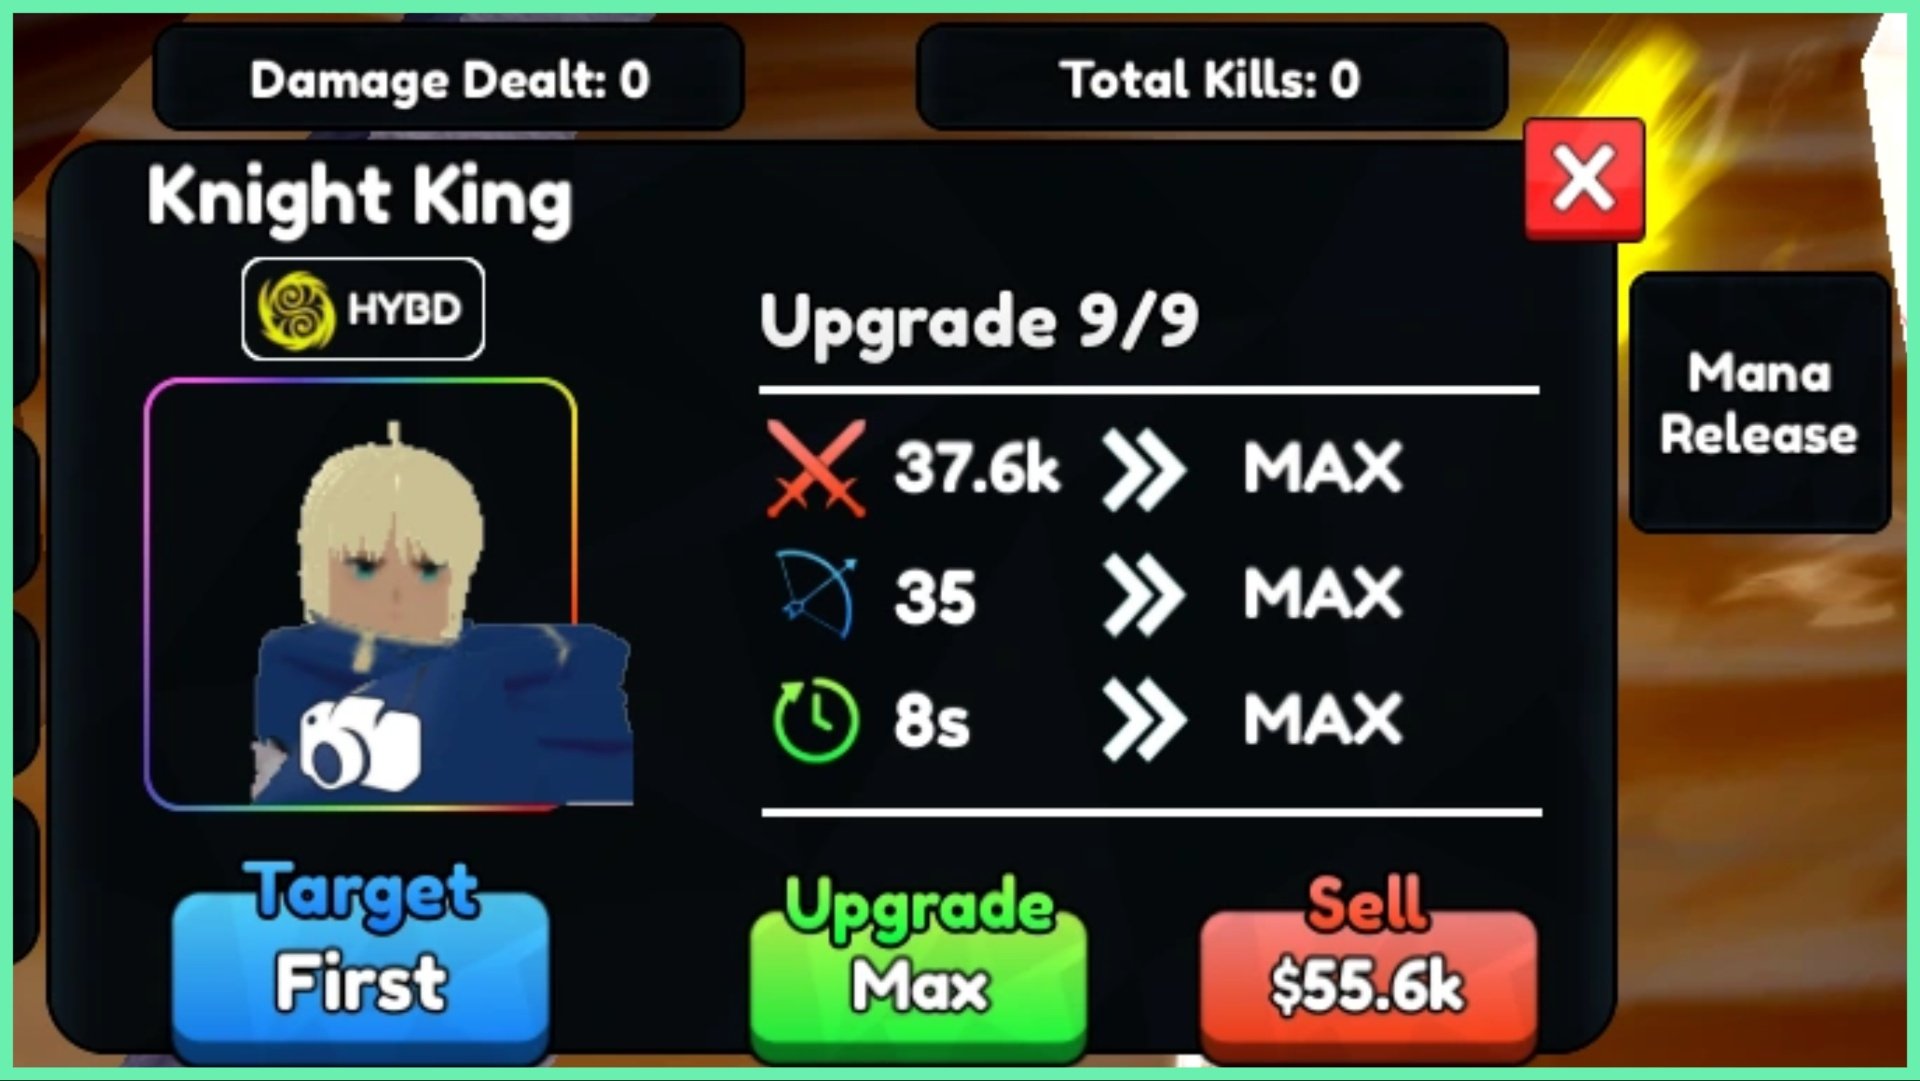 the image shows the knight king unit with max upgrades. The page shows the total stats and has a small png of the avatar on the left